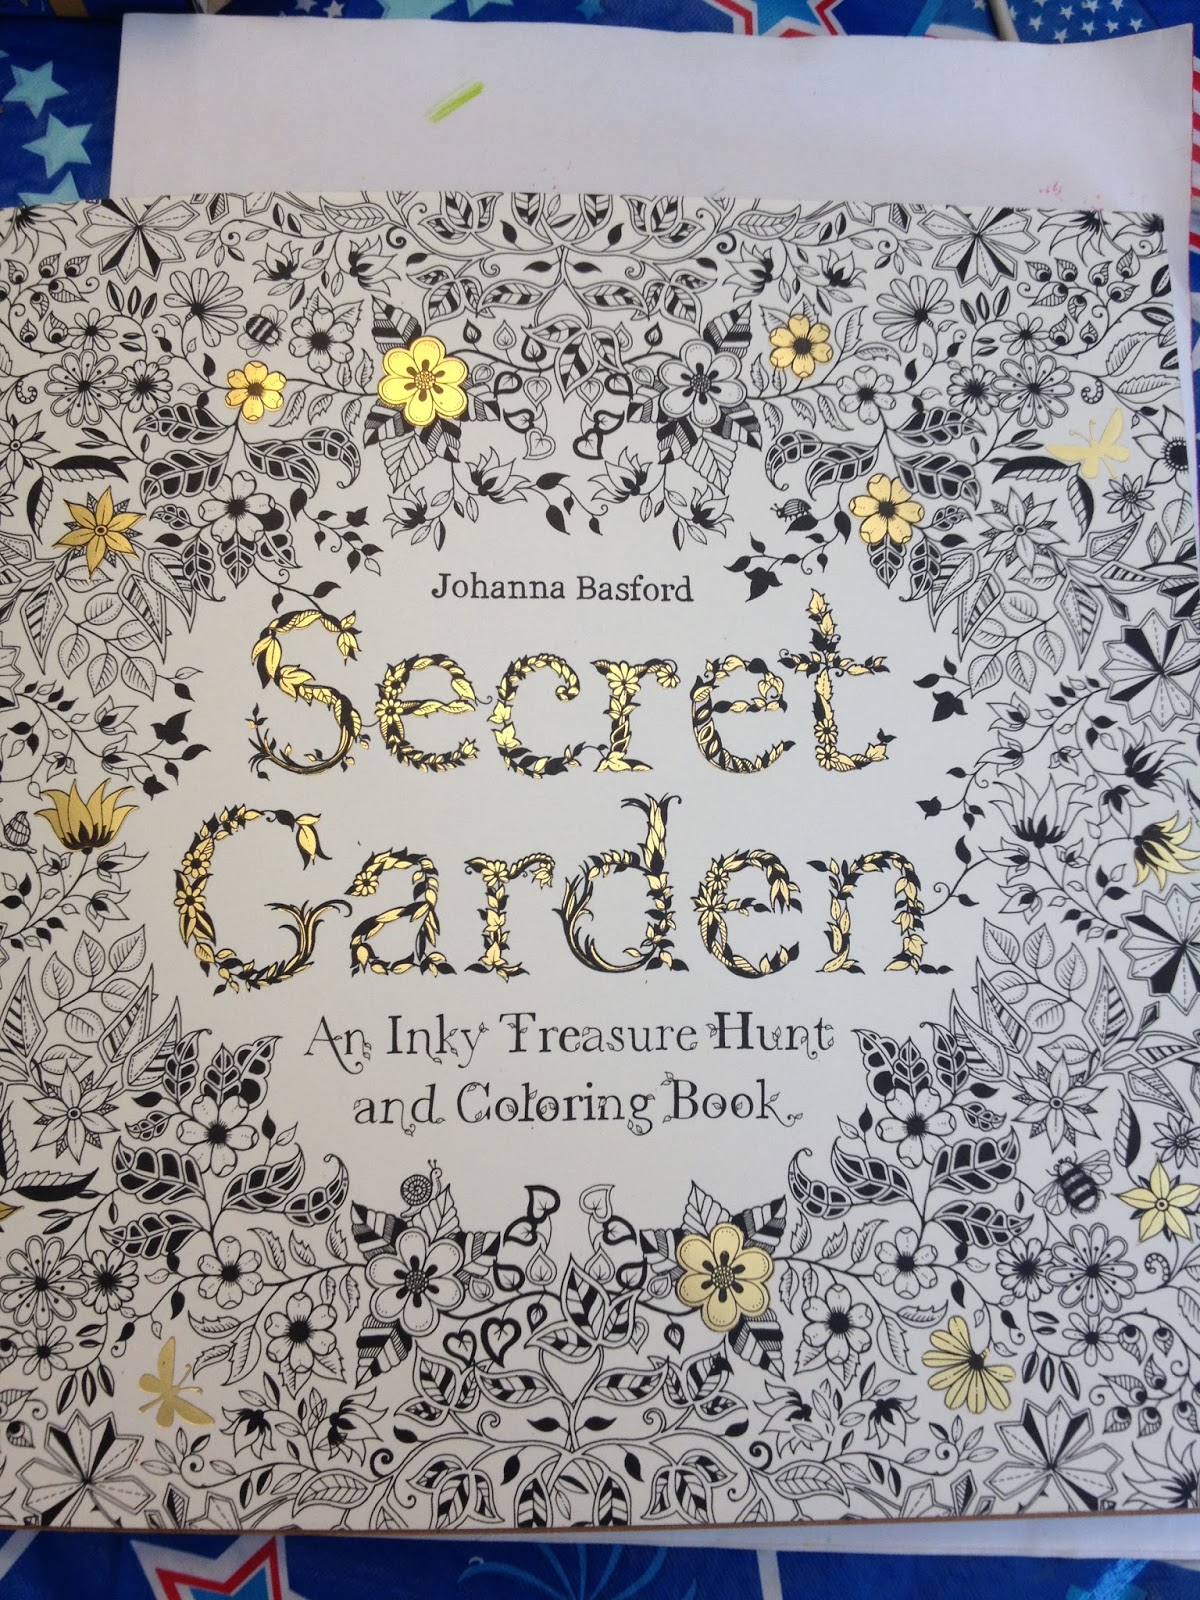 The Secret Garden adult coloring book by Johanna Basford is super popular